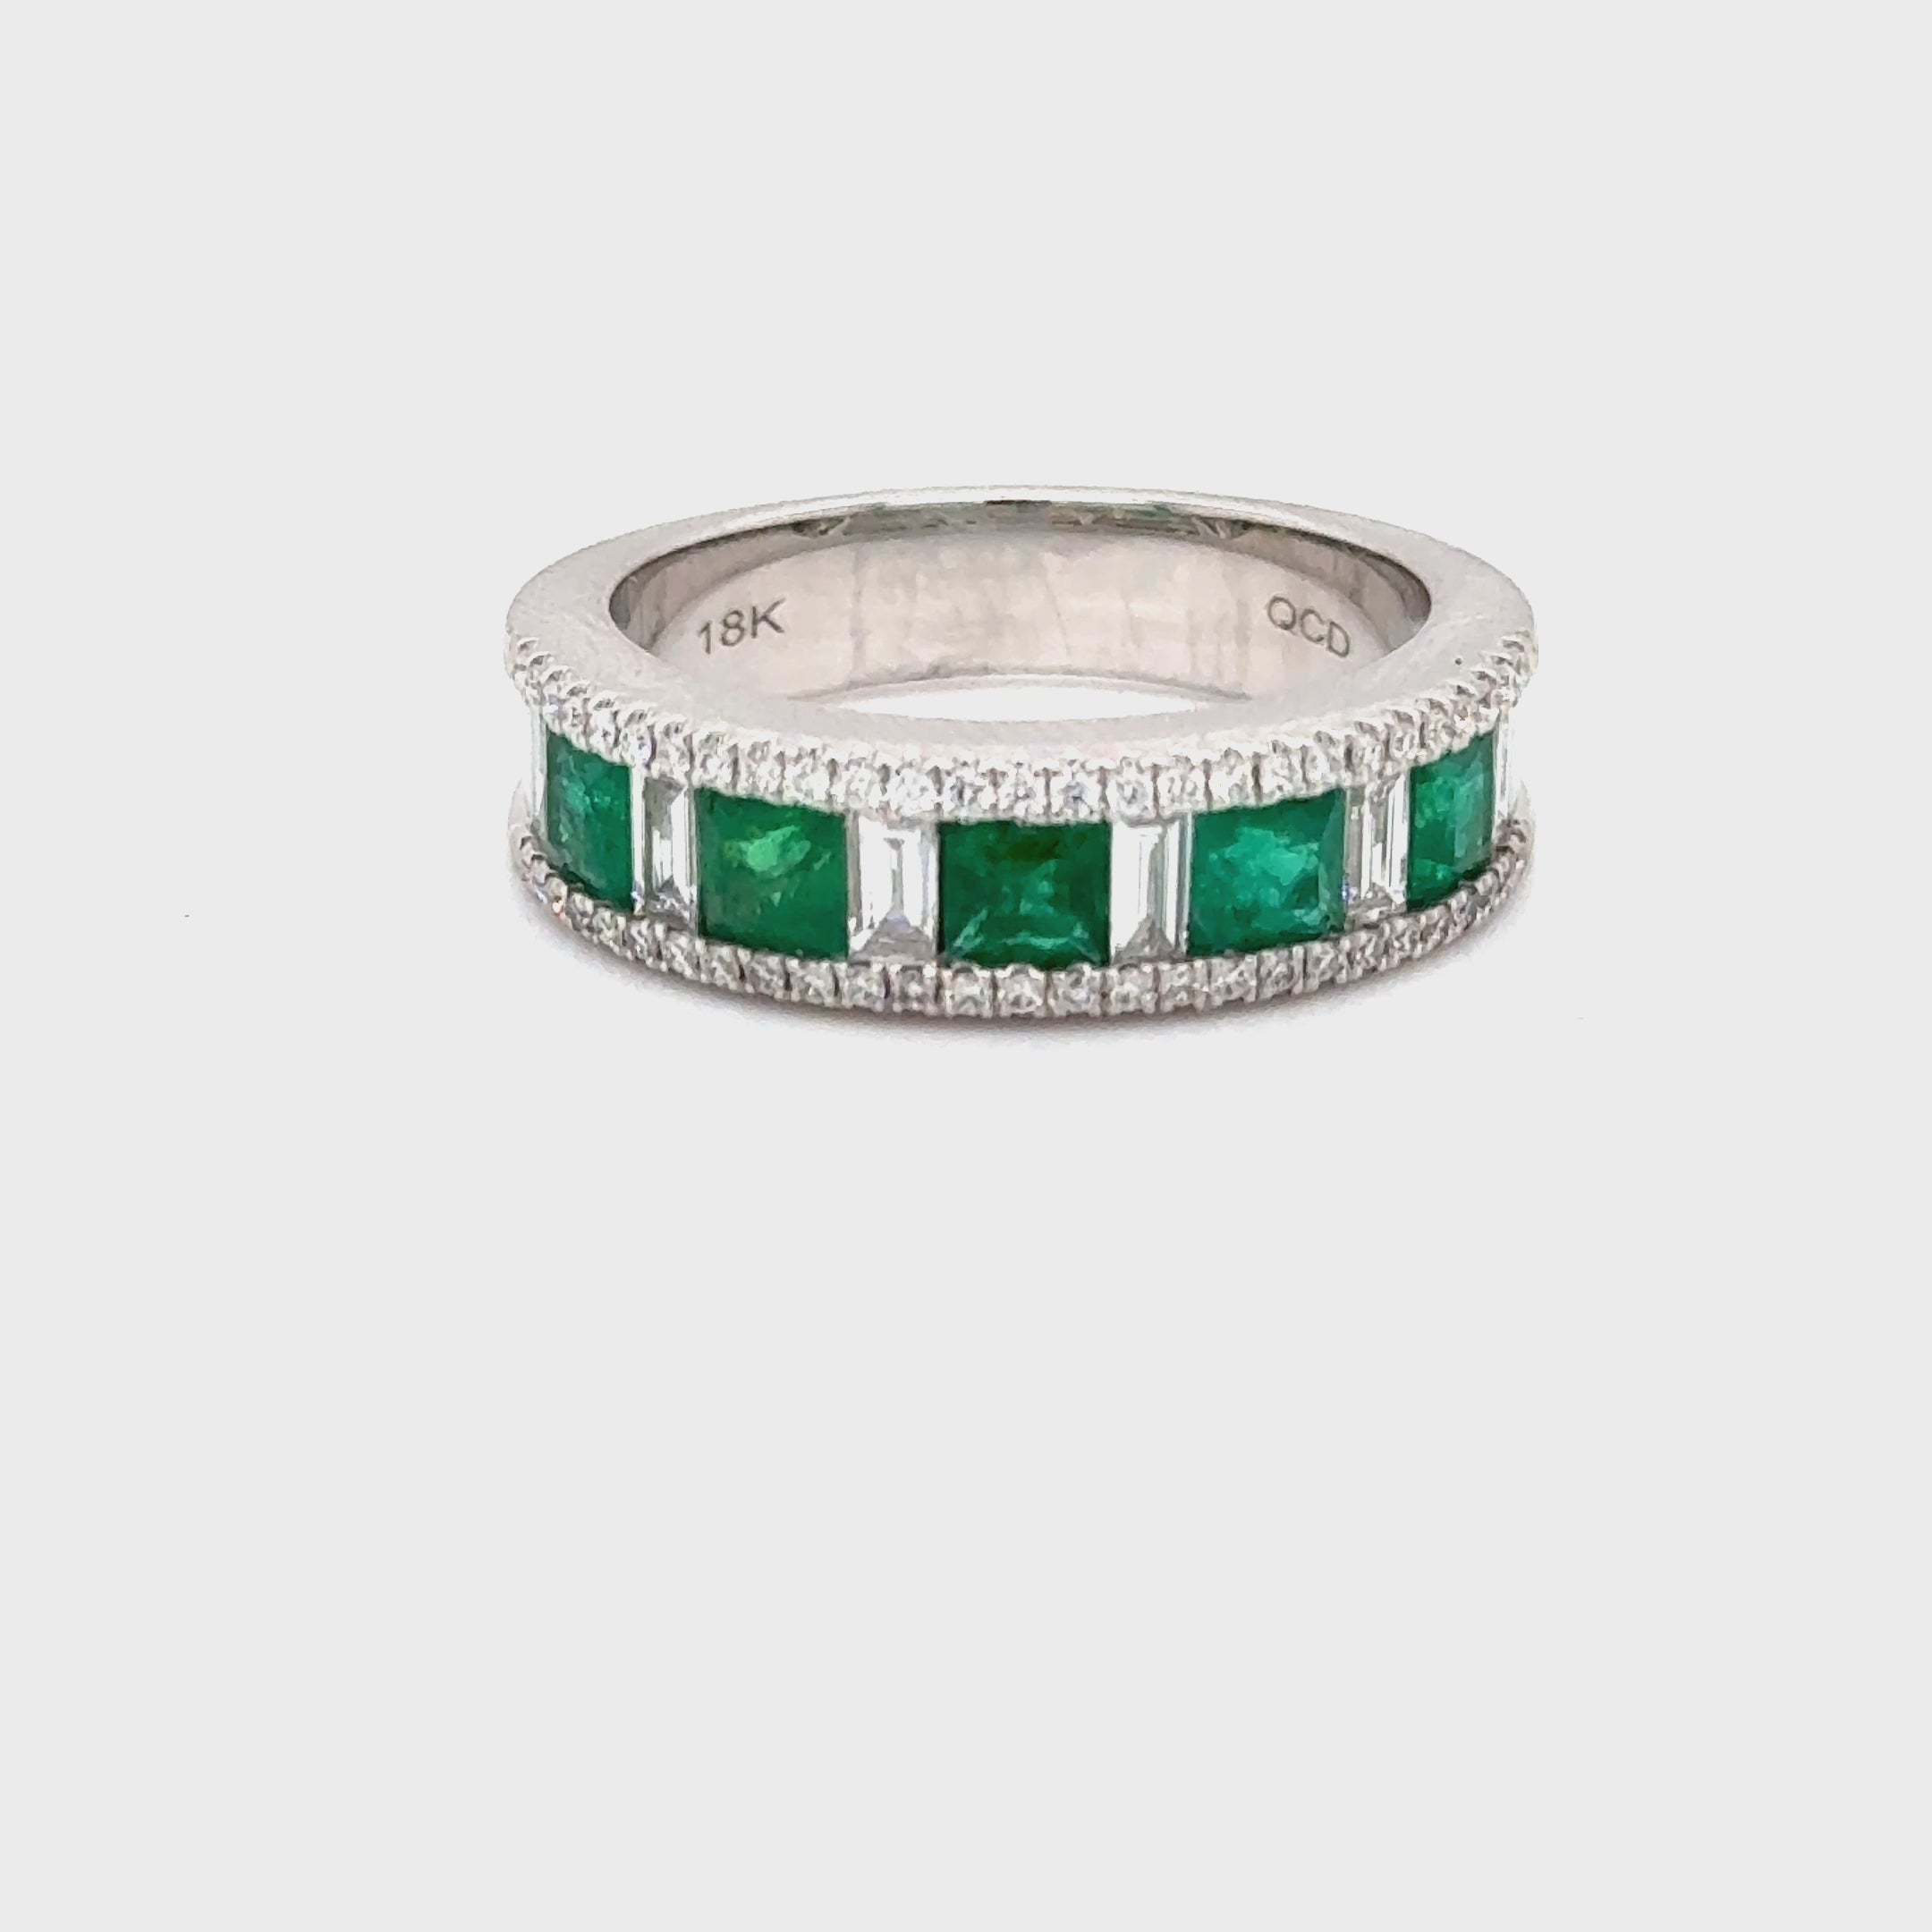 Emerald and Diamond band in 18k White Gold at Regard Jewelry in Austin, Texas